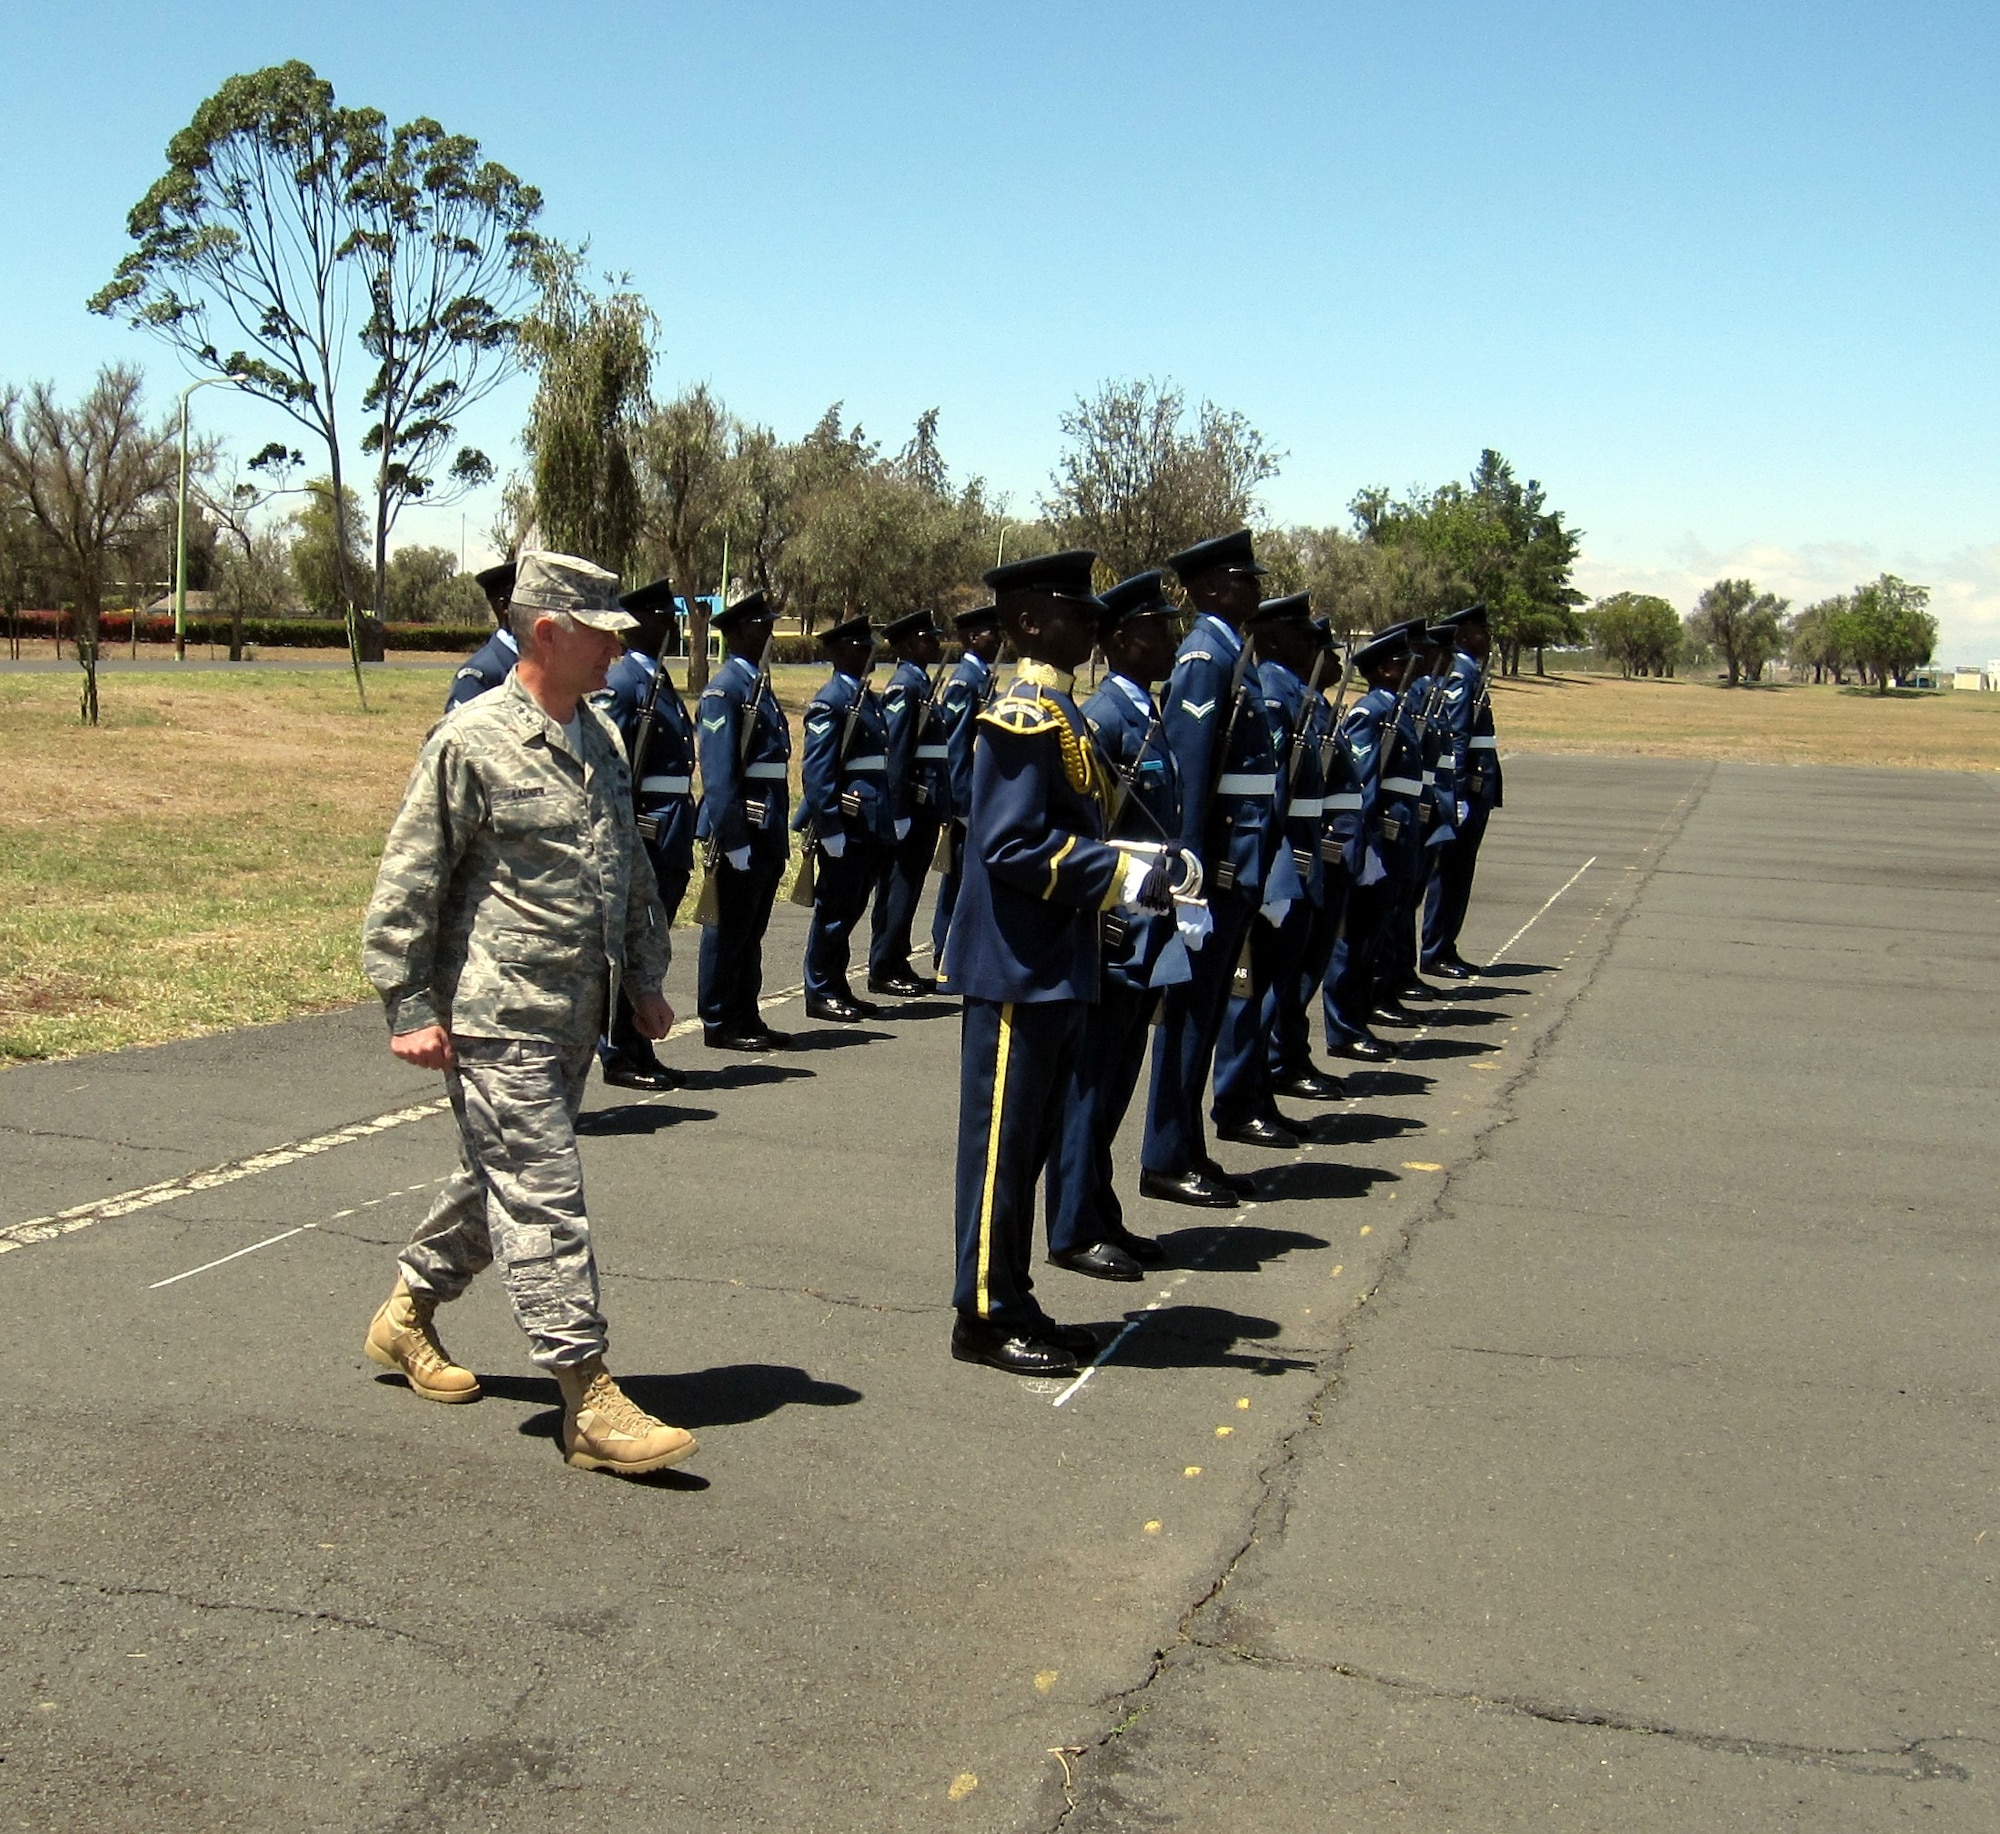 Maj. Gen. Ronald R. Ladnier, commander of Air Forces Africa, conducts a ceremonial inspection of Kenyan Air Forces troops at Laikipia Air Base, Kenya, Aug. 25. The formation was offered as part of the General’s welcome to the base during a senior leader engagement this week. General Ladnier met with senior Kenyan defense officials, including Kenyan Air Force leadership. The SLE included discussion on how AFAFRICA, also known as 17th Air Force, can continue to assist Kenya in the evolution of its air force. (U.S. Air Force photo by Master Sgt. Jim Fisher) 